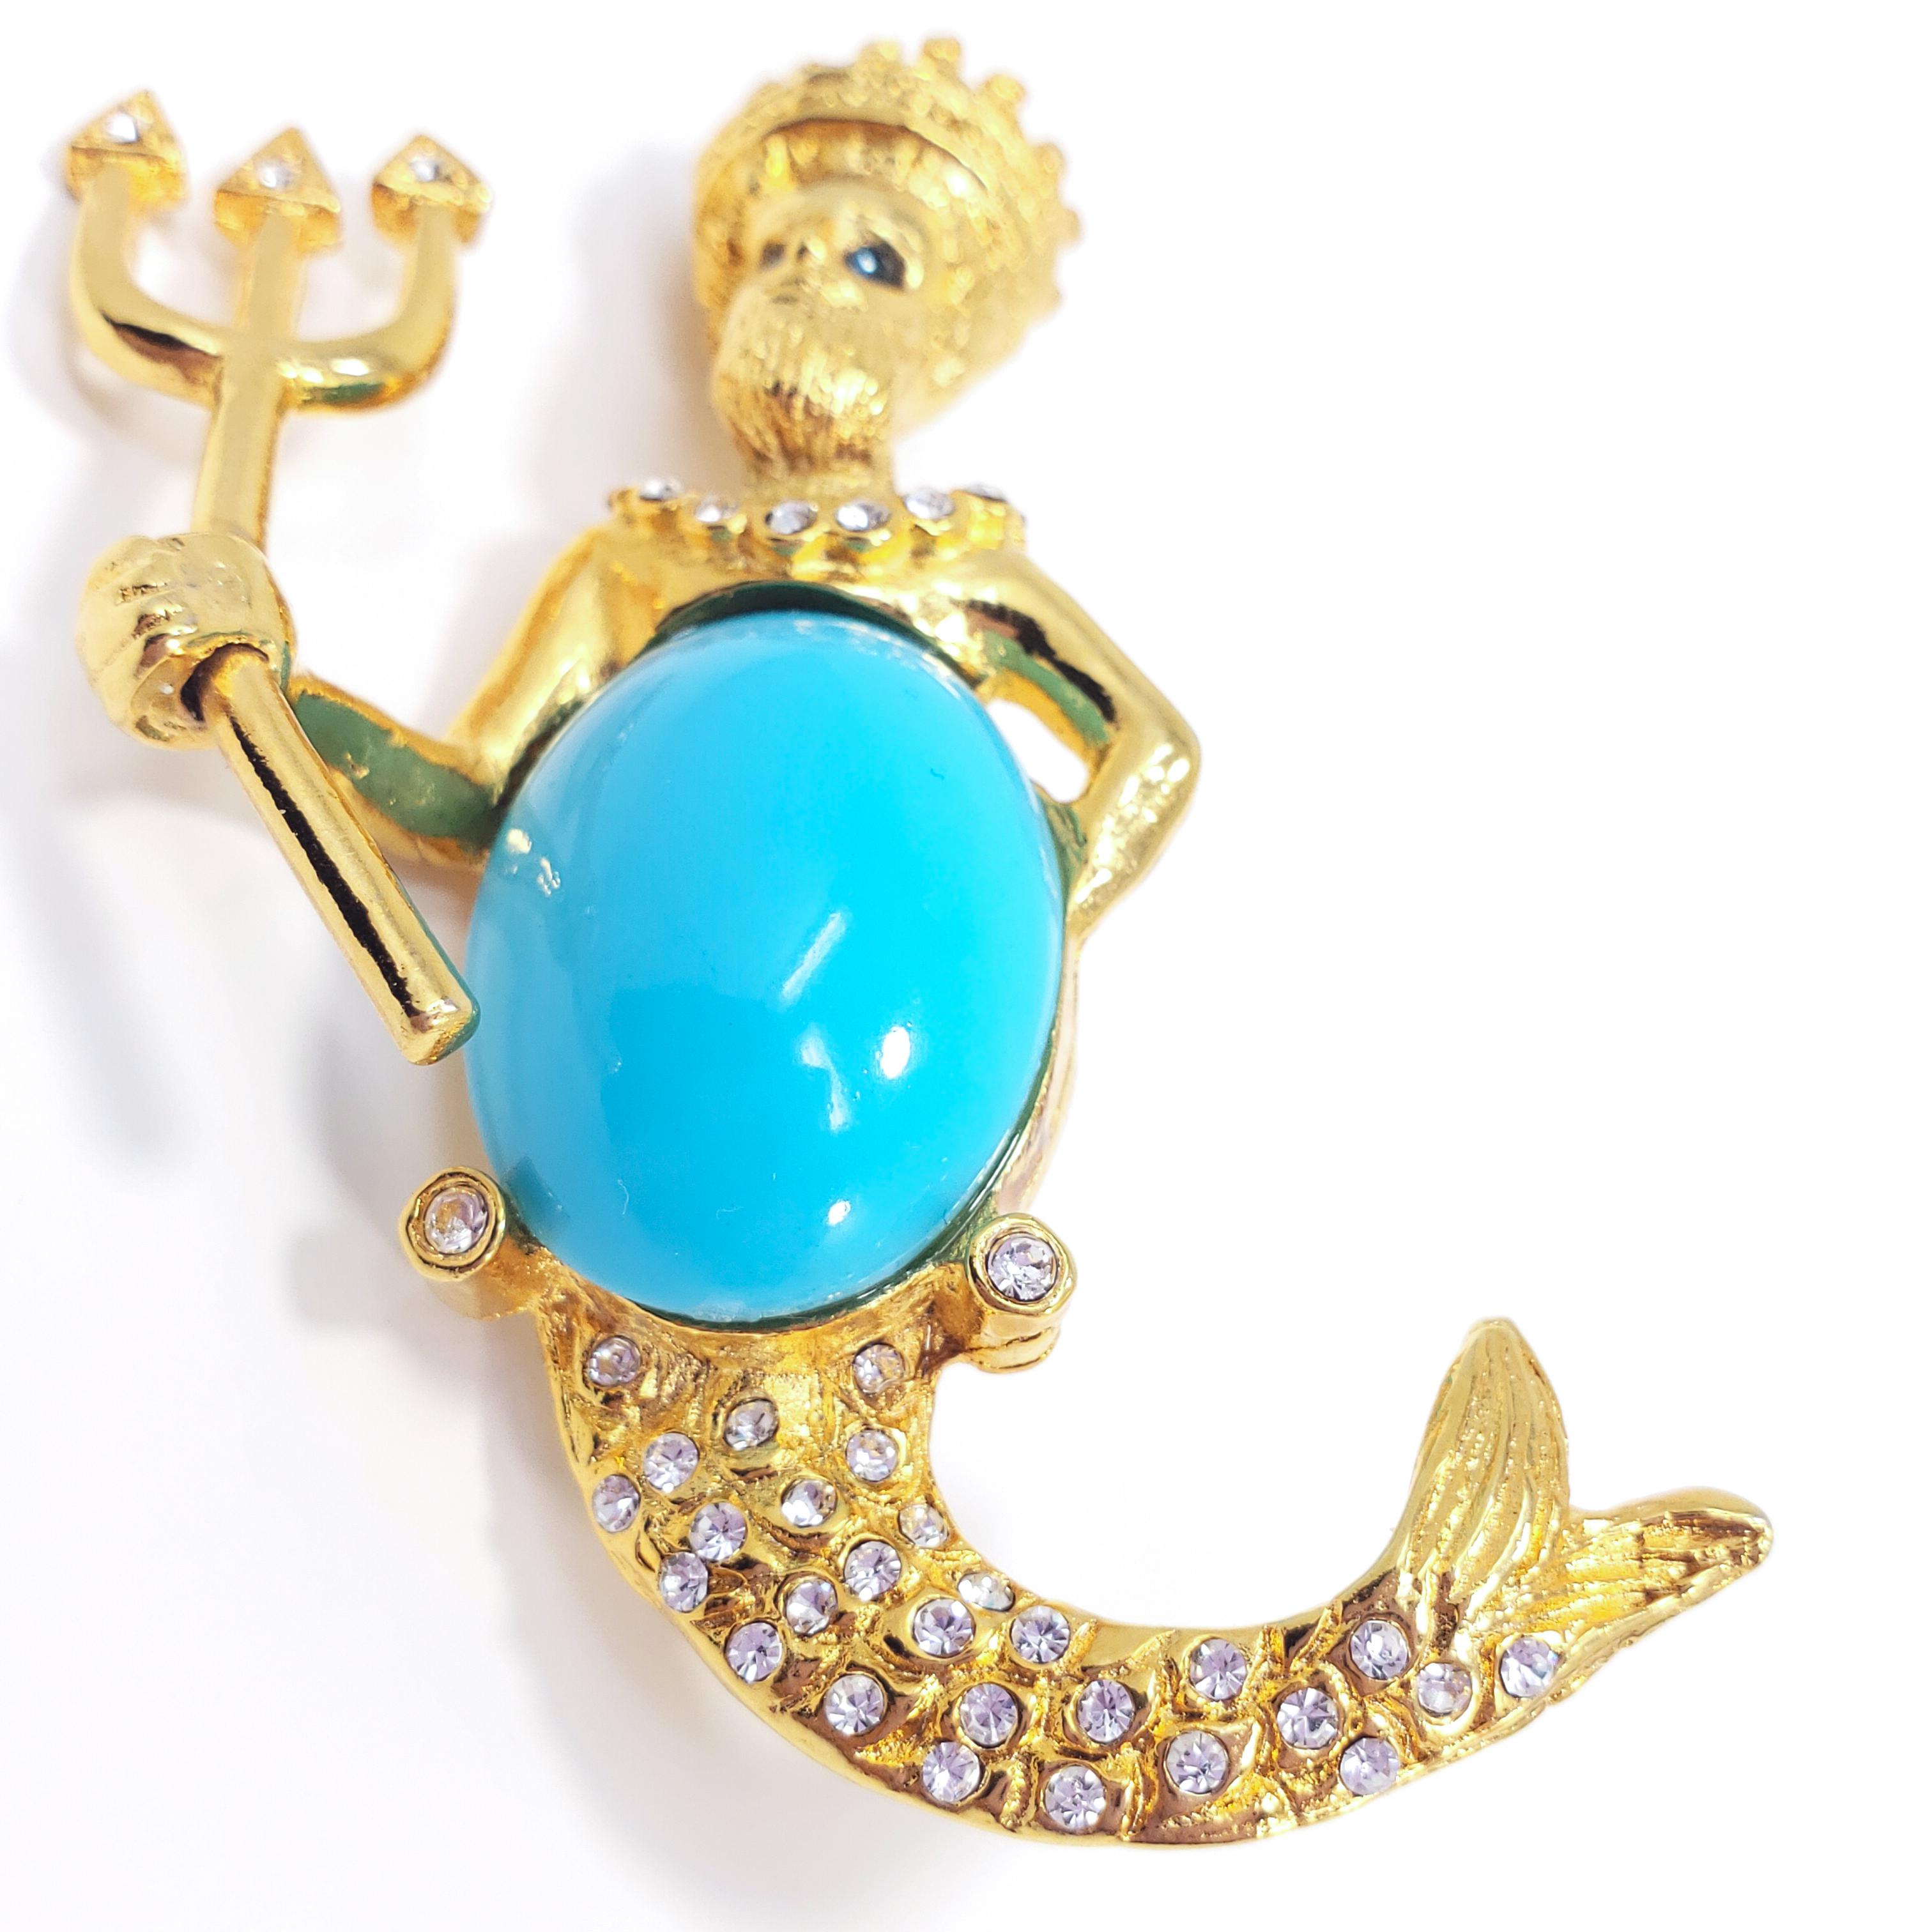 Kenneth Jay Lane's fierce Poseidon/Neptune brooch, featuring a crystal-encrusted, gold-tone Poseidon wearing a crown and holding a trident and faux-turquoise cabochon shield.

Hallmarks: Kenneth © Lane, Made in USA
